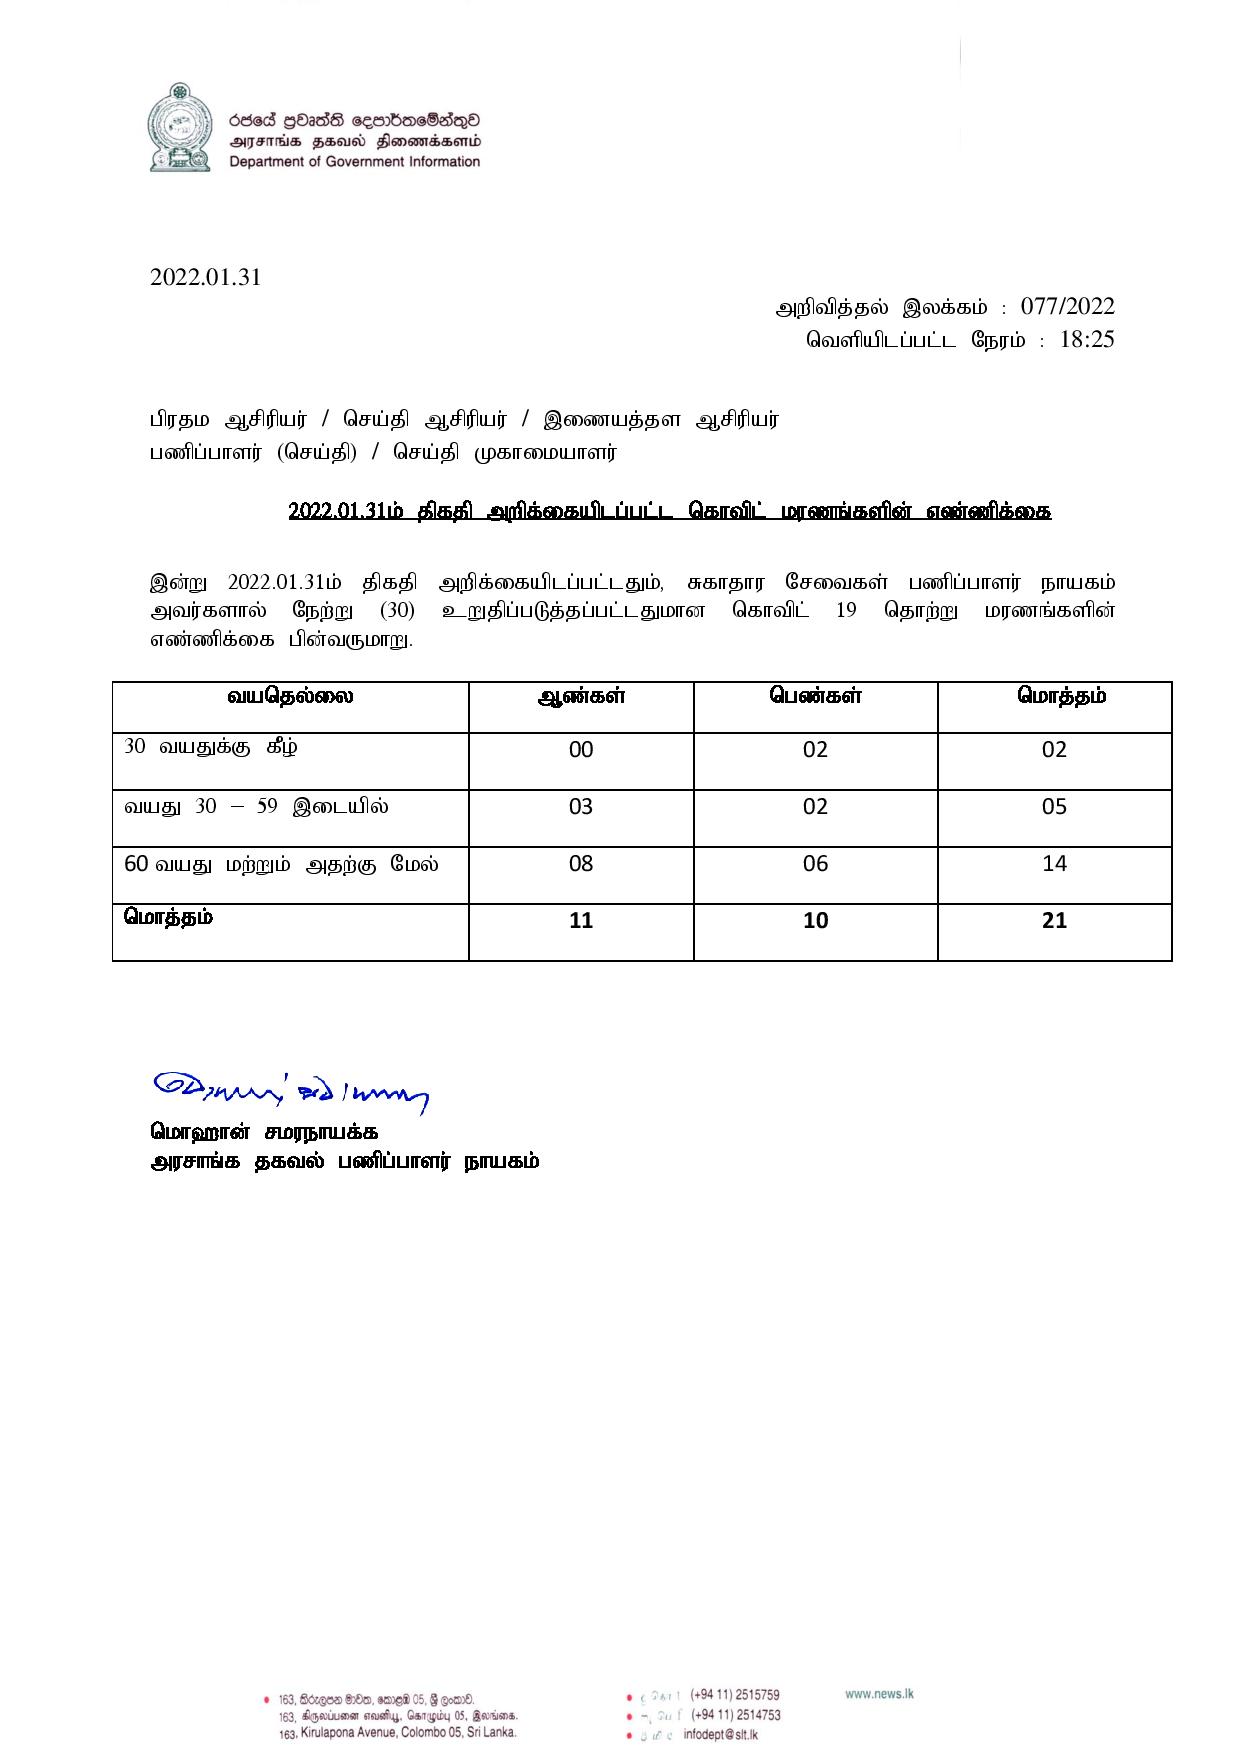 Press Release 77 Tamil page 001